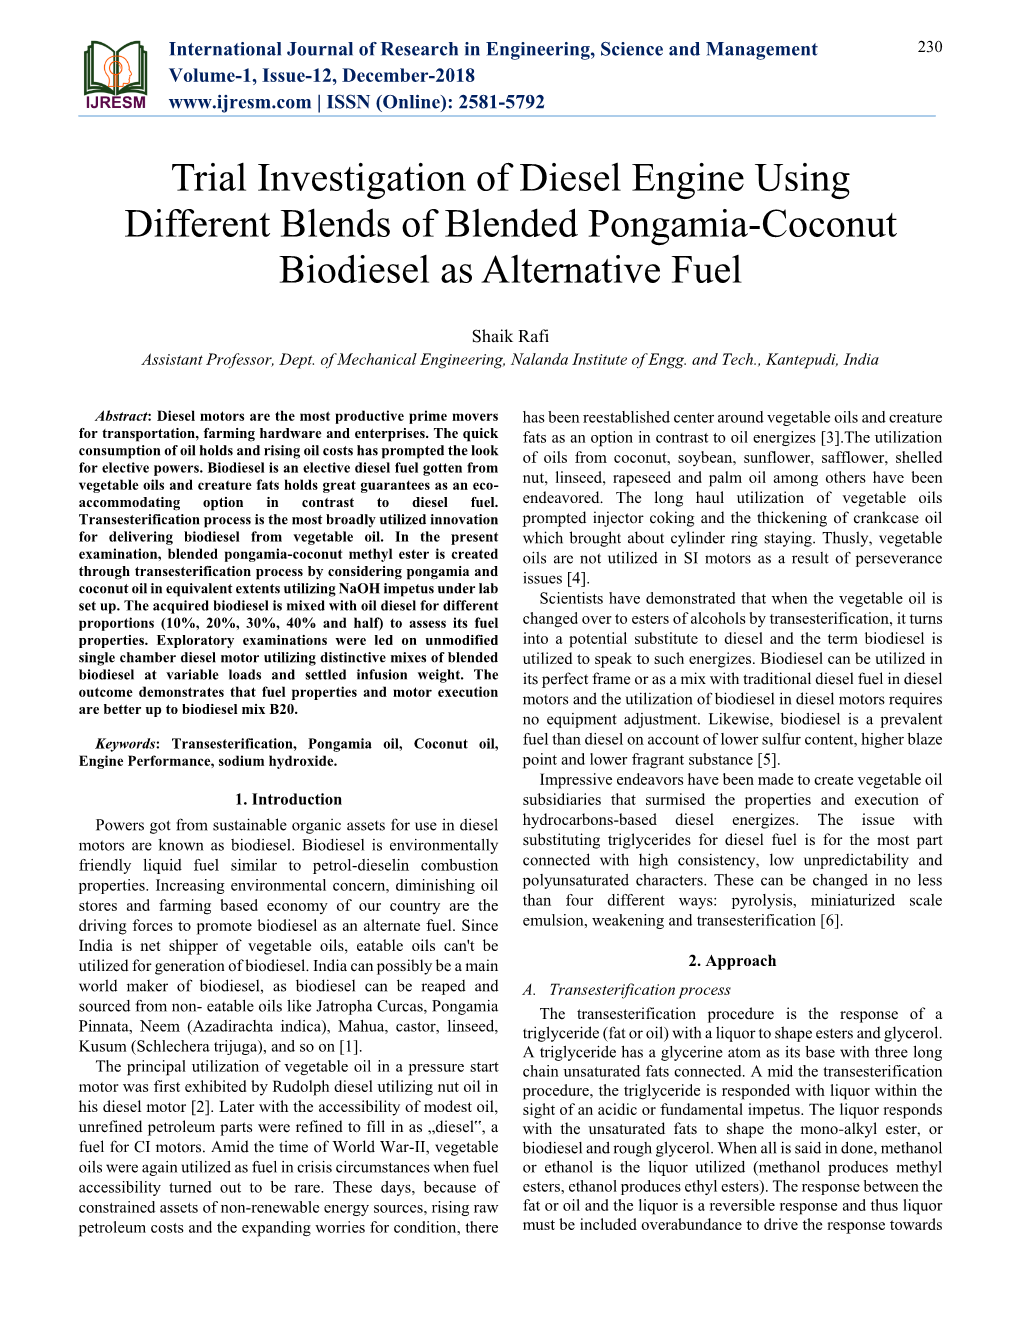 Trial Investigation of Diesel Engine Using Different Blends of Blended Pongamia-Coconut Biodiesel As Alternative Fuel